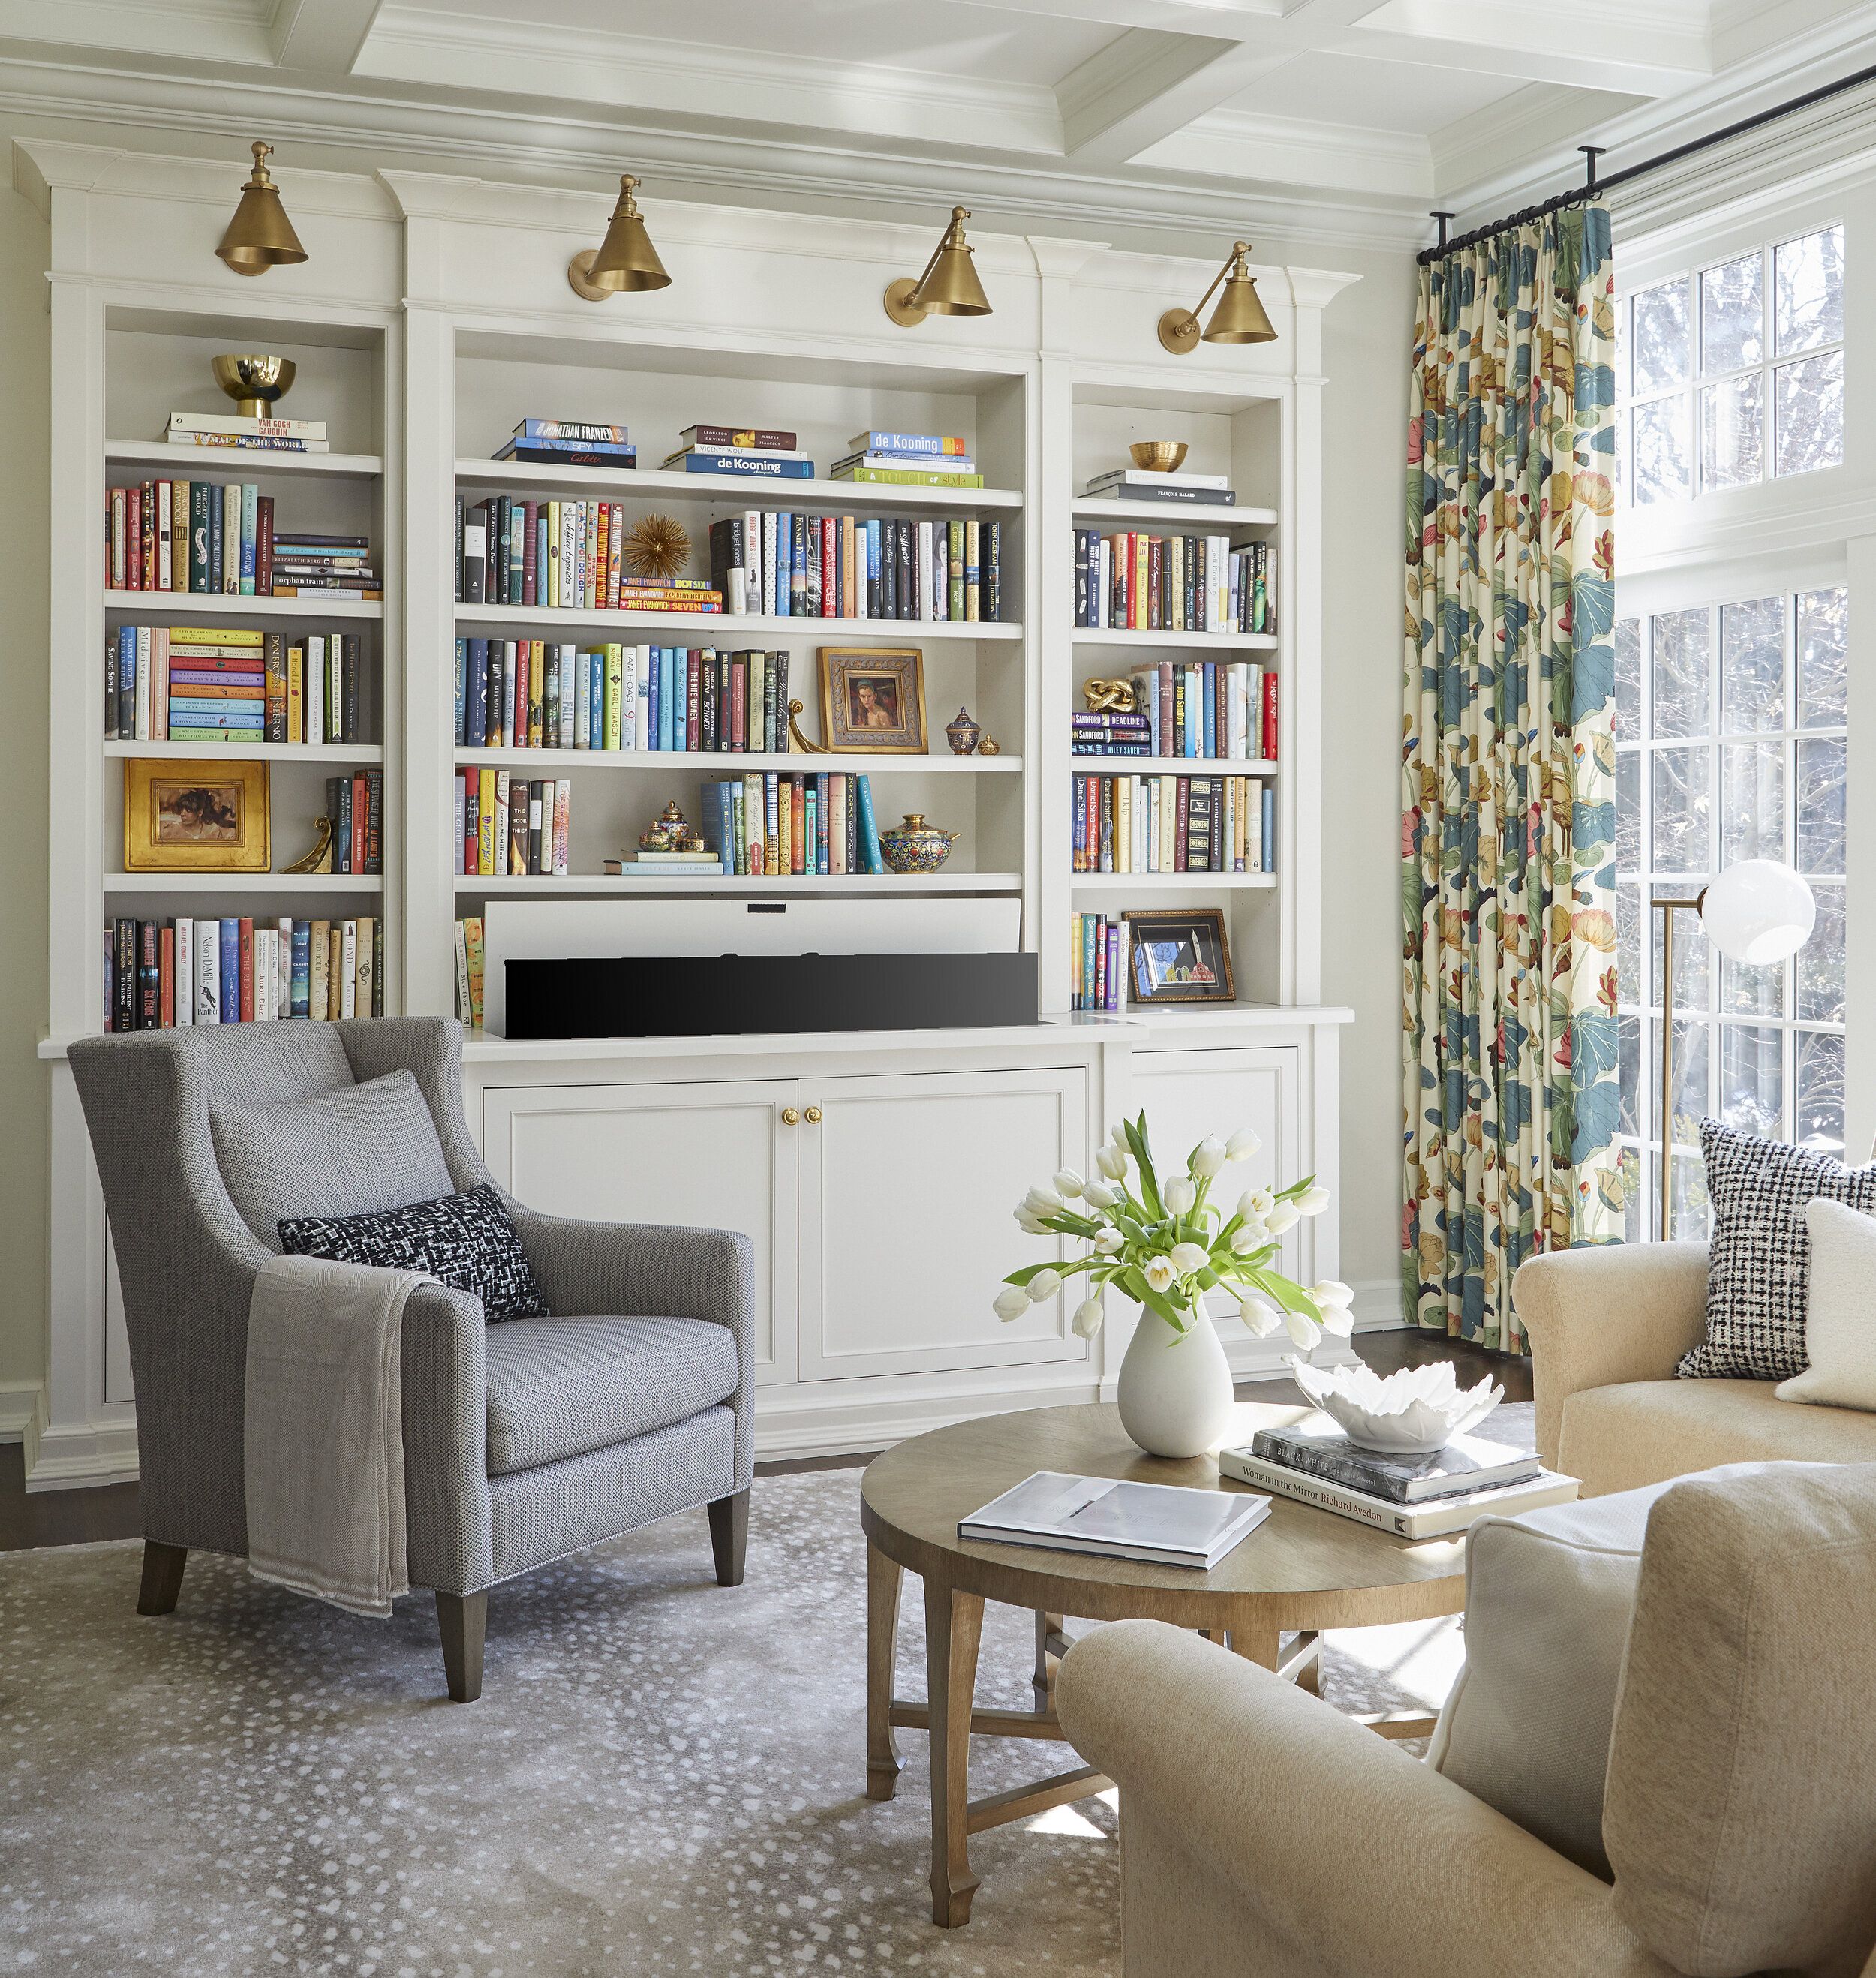 How To Organize Your Bookshelves, How To Organize Open Shelves In Living Room